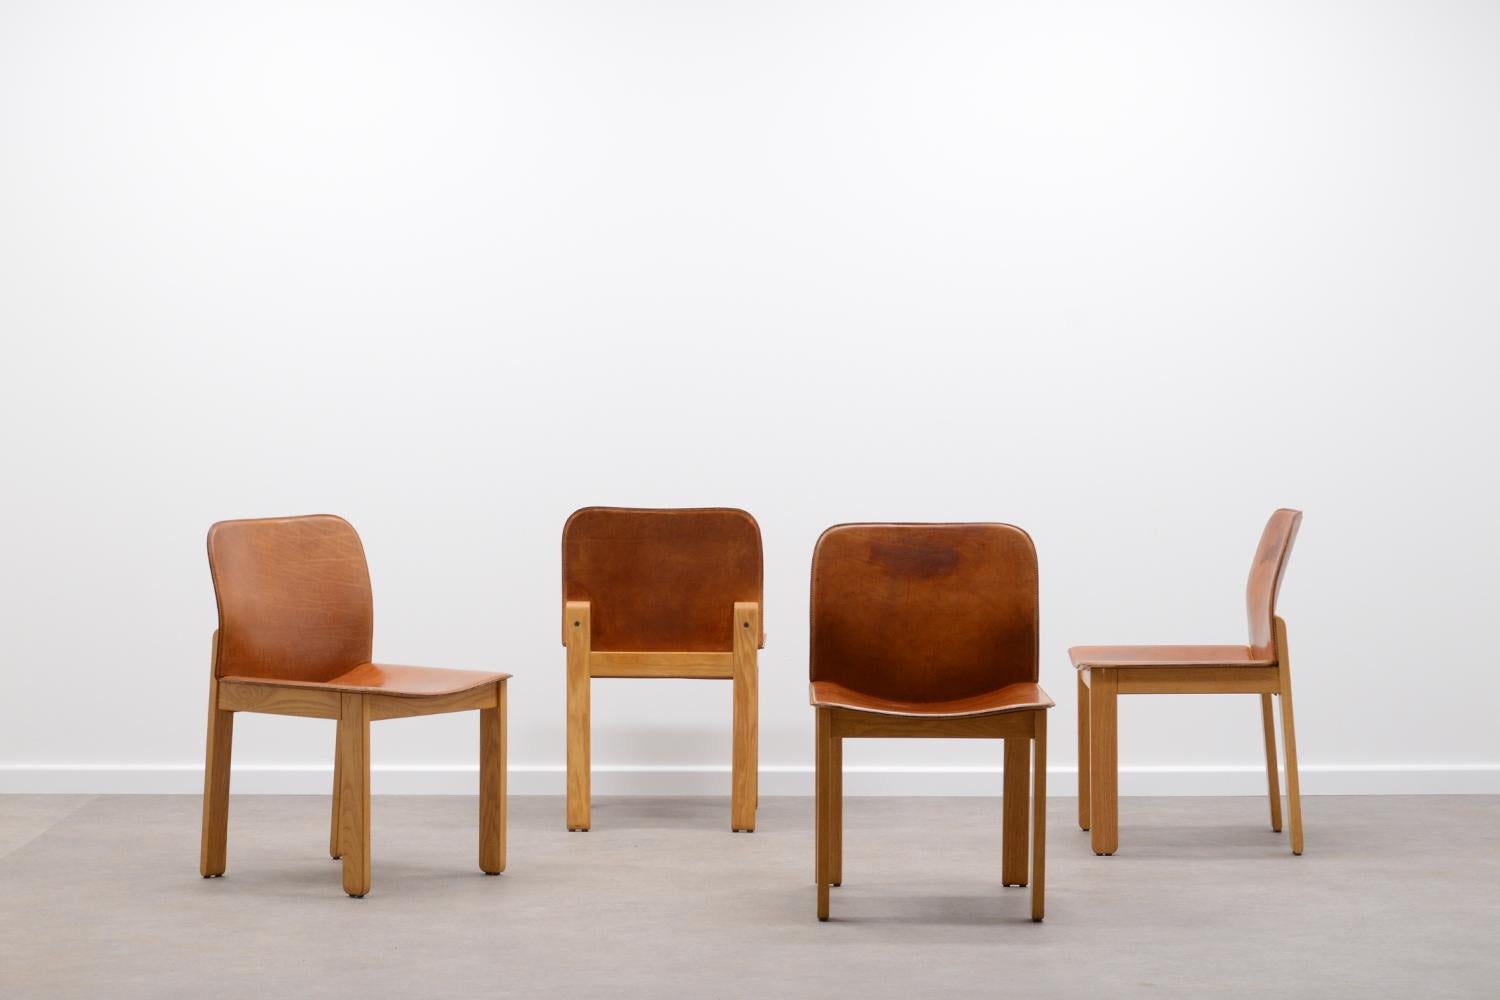 Set of beautiful chairs in very good condition.

Designed by Afra & Tobia Scarpa 

Produced in Italy in the 1970s 

The seat of these chairs is made from thick natural leather with a beautiful patinated cognac color.

The frame is made from